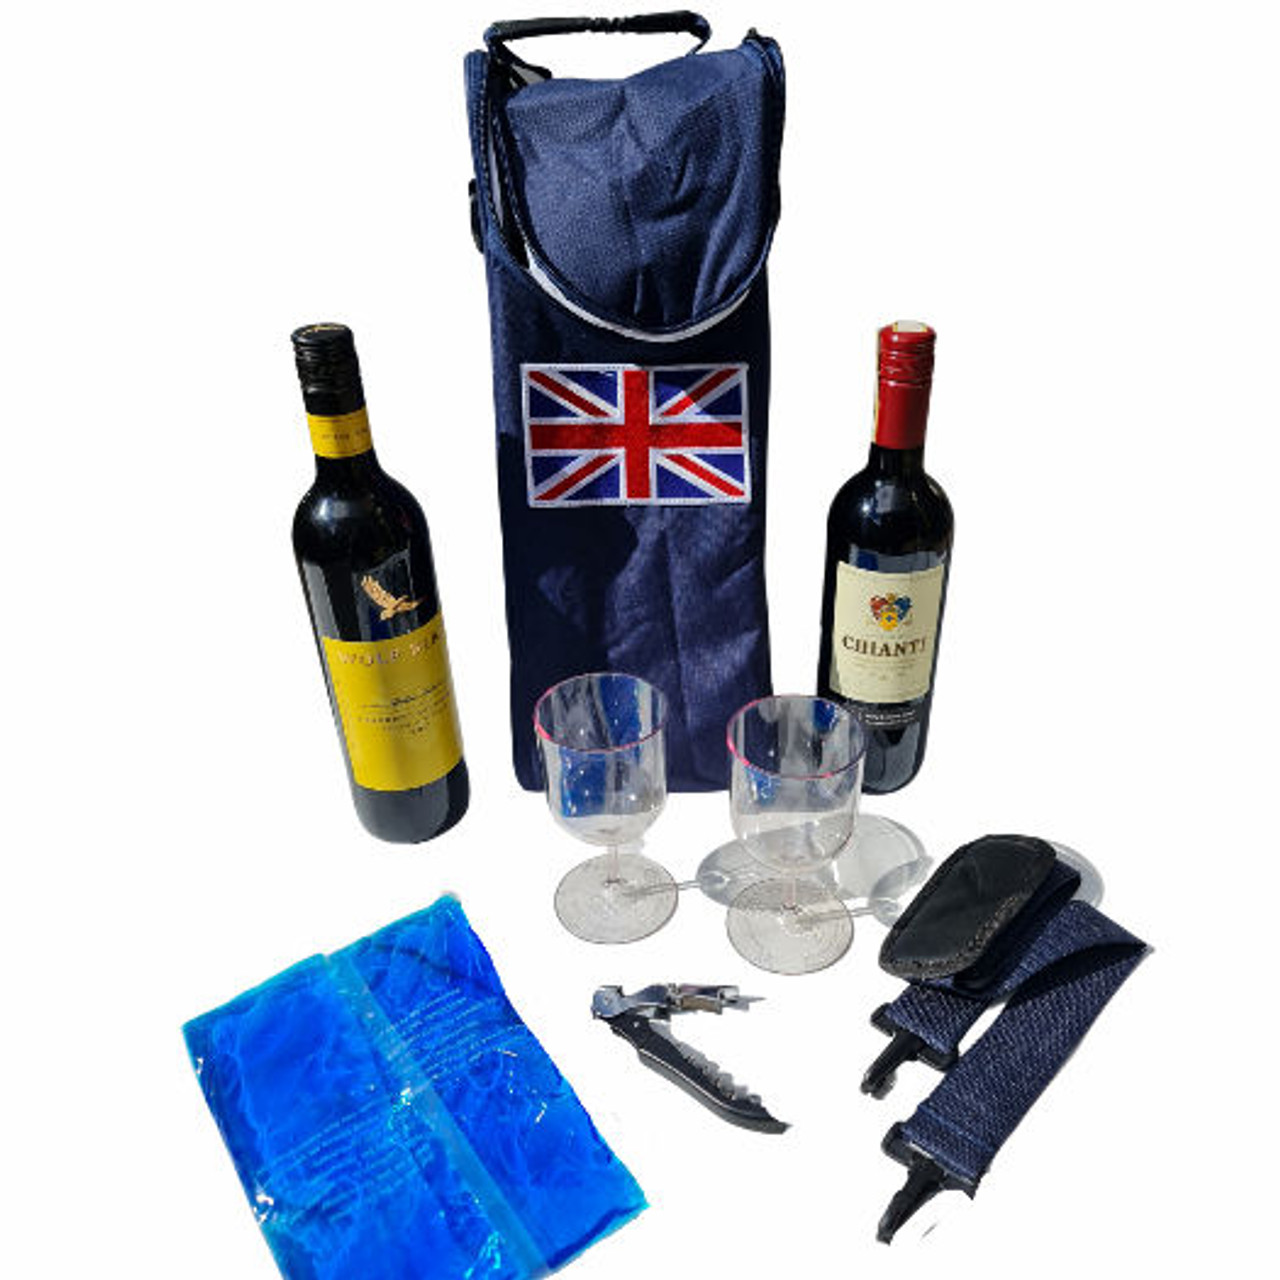 Union Jack Thermal Champagne or 2 Wine Bottle Carrier incl 2 High Quality re-usable PET Glasses, Cork Screw & 2 Freezable Pouches